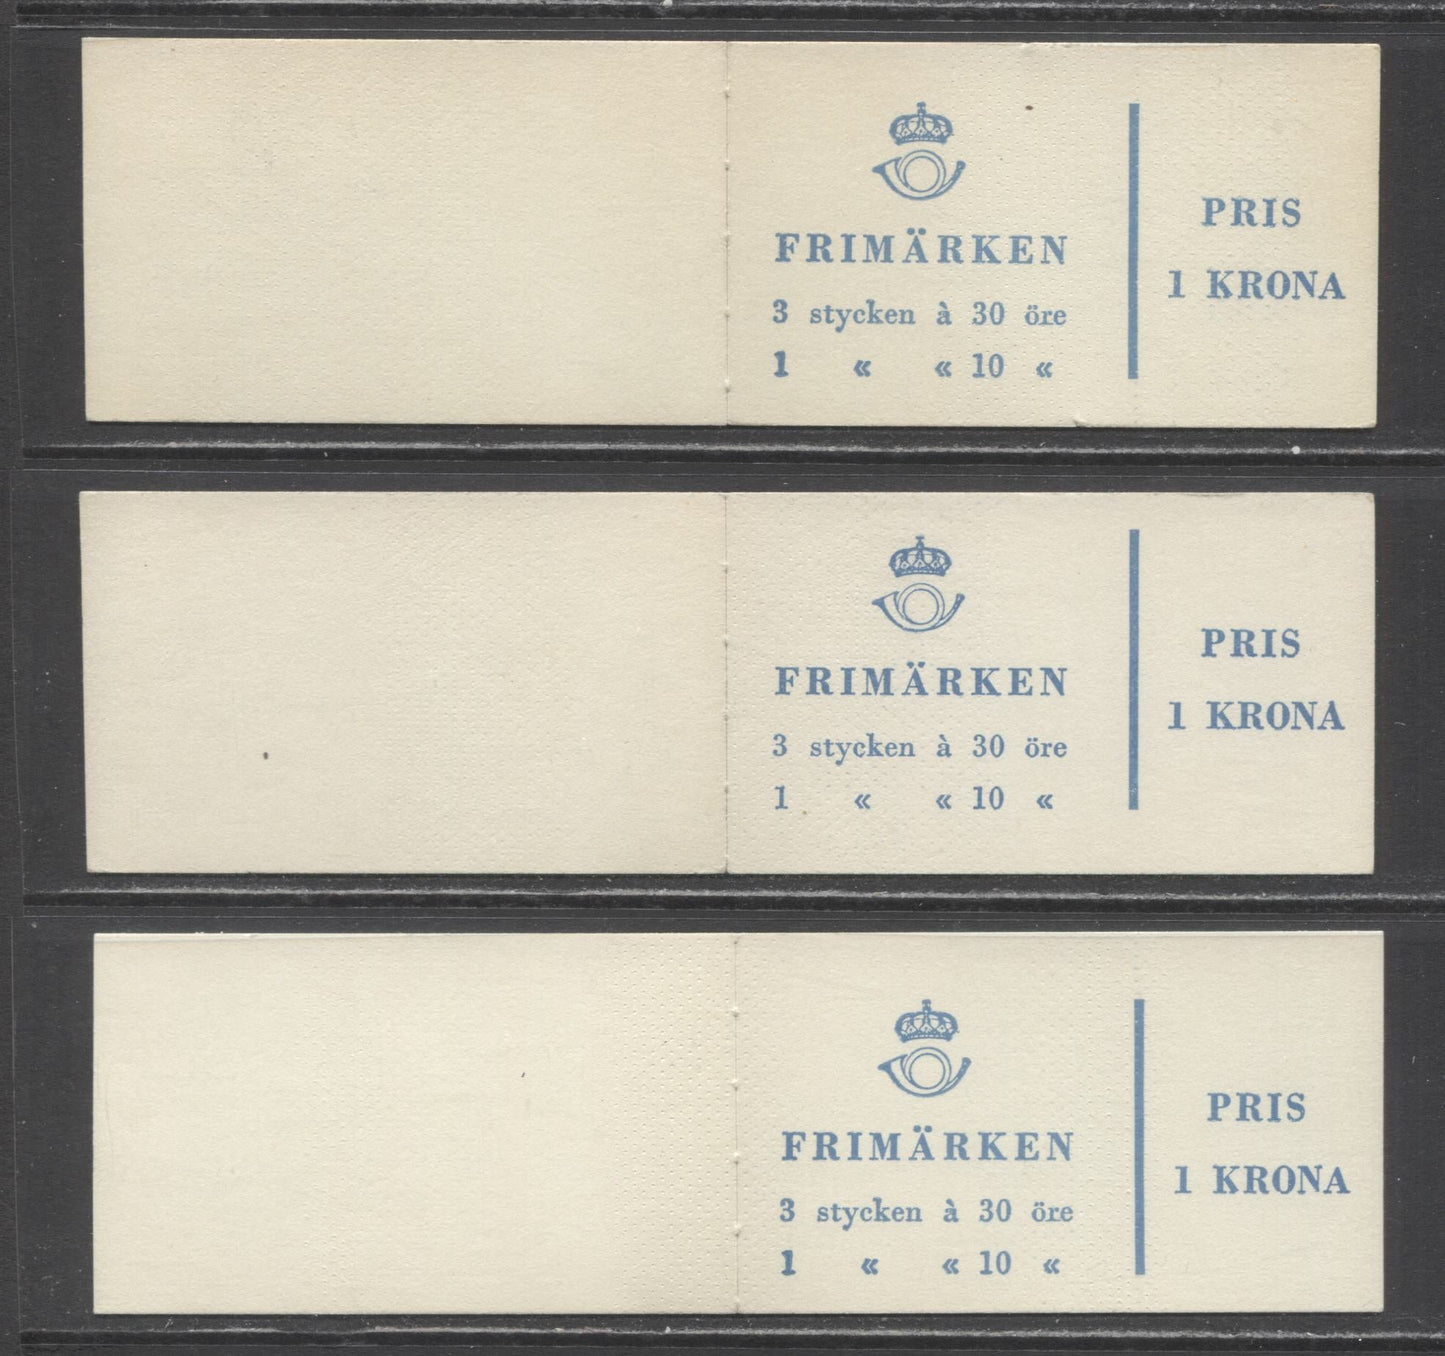 Lot 161 Sweden SC#584b (Facit HA8DV & OH)/584b (Facit HA8DOH) 1961 Re-Engraved King Gustav VI Adolf Definitive Issue, All With Different Selvedge Markings, Inverted Panes, 3 VFNH Booklets of 4 (3 +1), Estimated Value $15